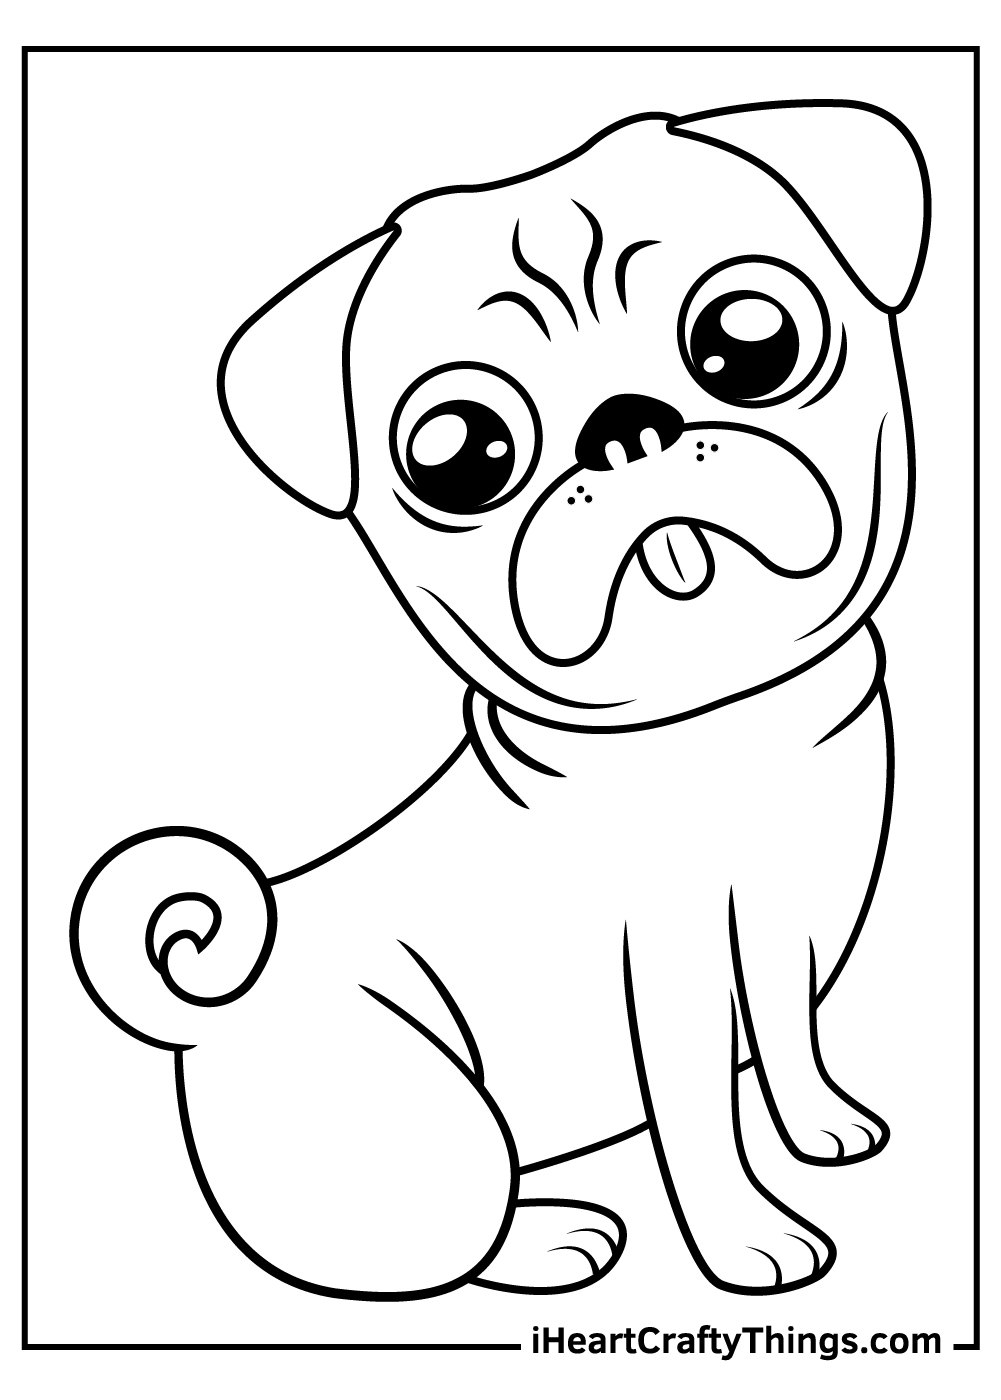 Pug Coloring Pages Updated 20